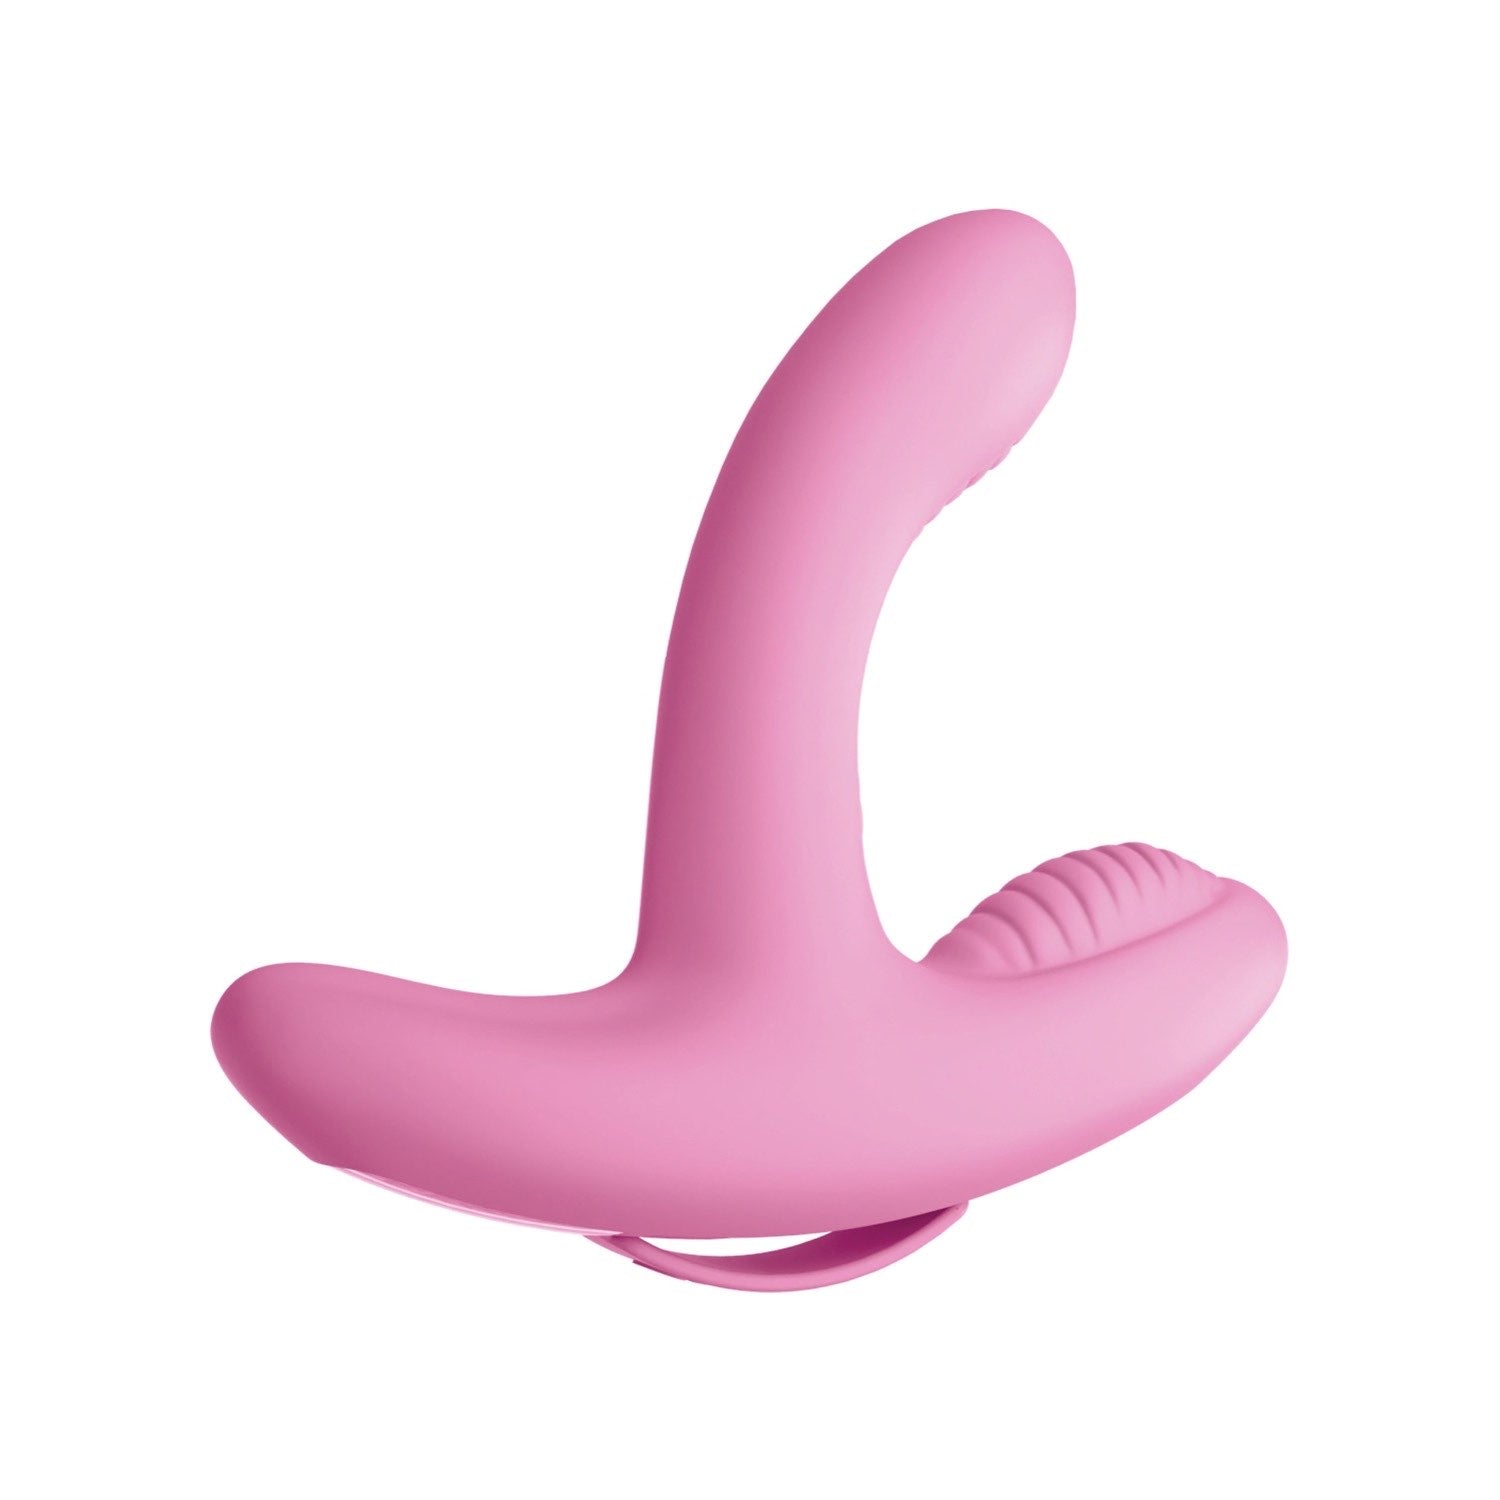 3Some Rock N Grind - Pink USB Rechargeable Stimulator with Wireless Remote by Pipedream